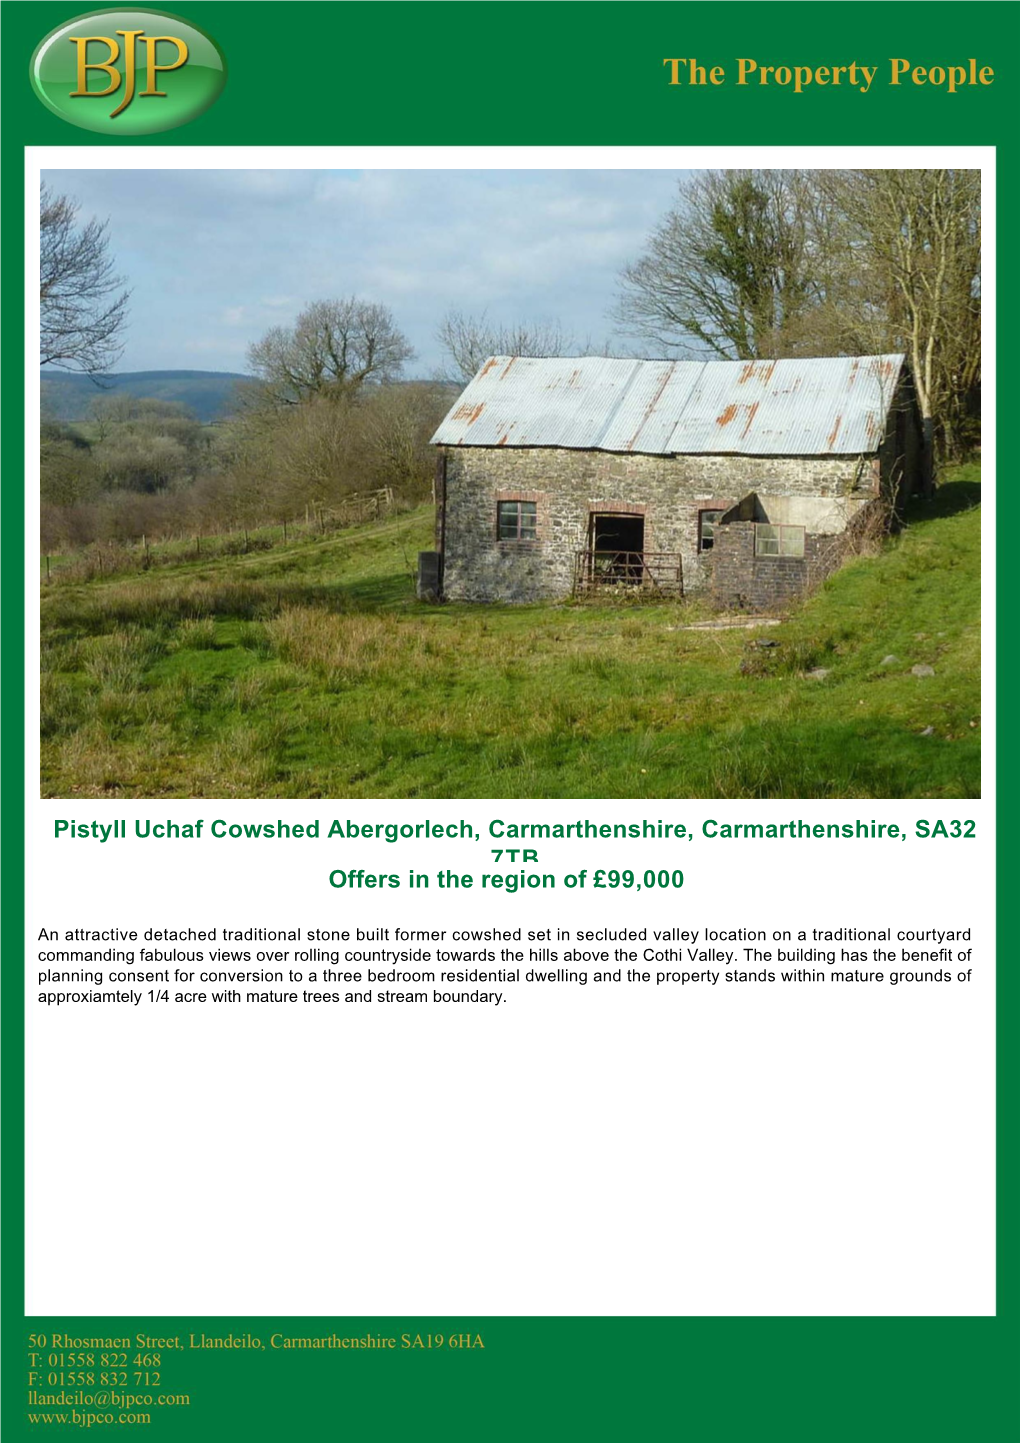 Abergorlech, Carmarthenshire, Carmarthenshire, SA32 7TB Offers in the Region of £99,000